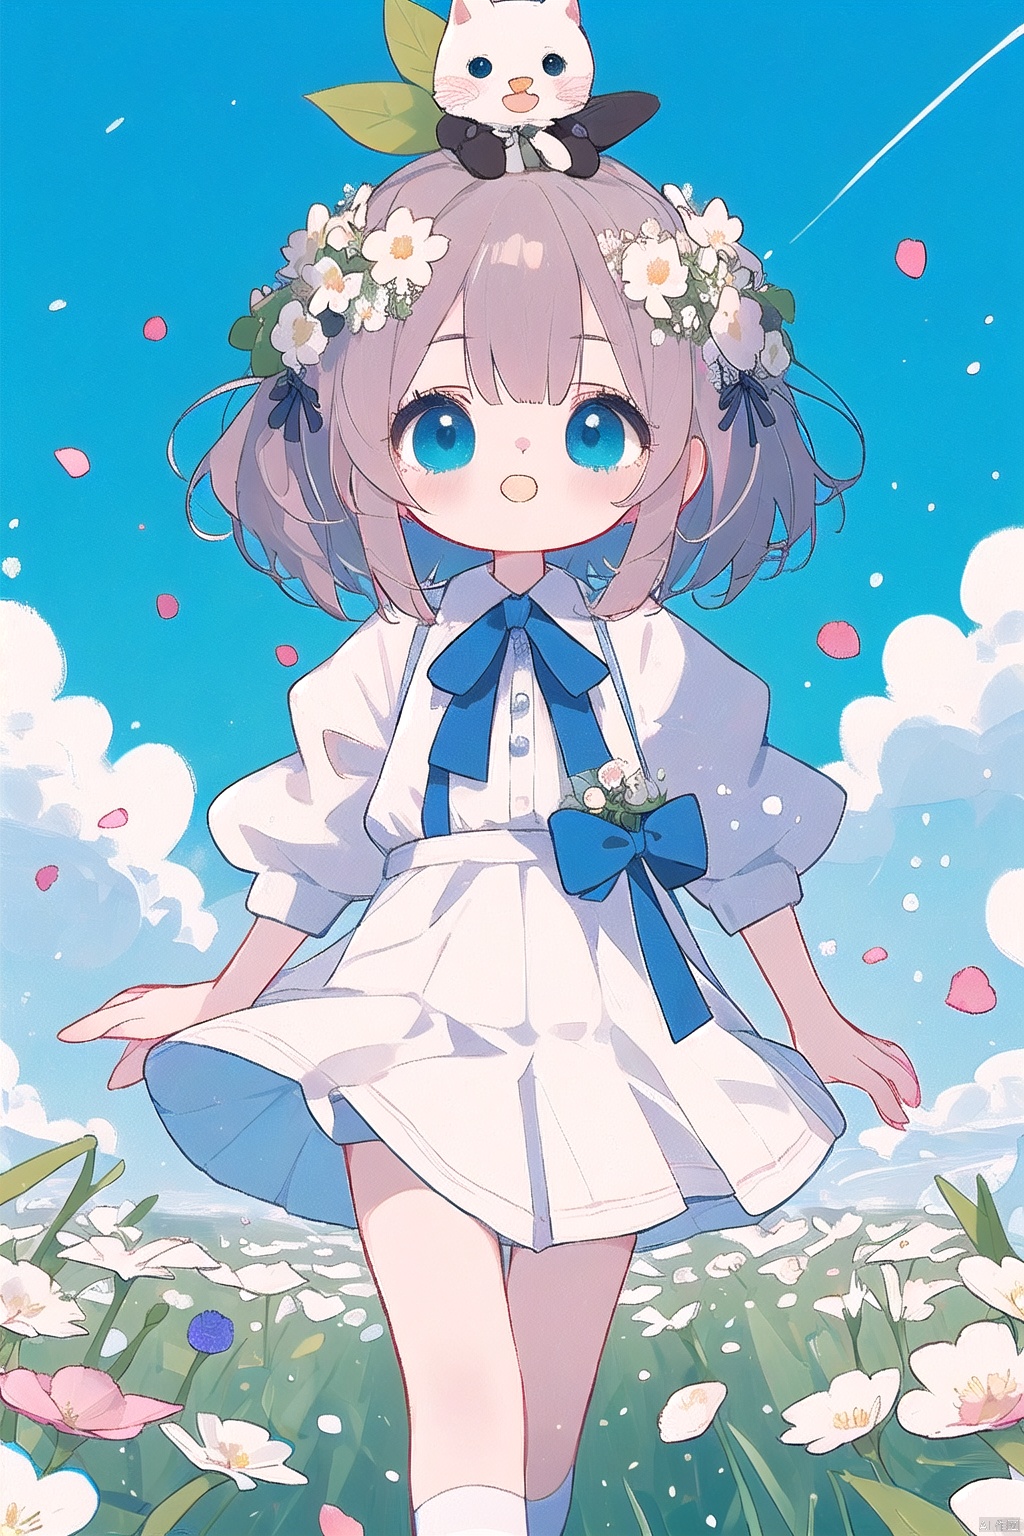 1 girl, beautiful and lovely, running in the flower field with her back, holding a bouquet of flowers in her hand, wearing a flower wreath on her head, a white short skirt, swaying in the breeze, petals dancing, blue sky and white clouds, loli,artist:nano, 30710